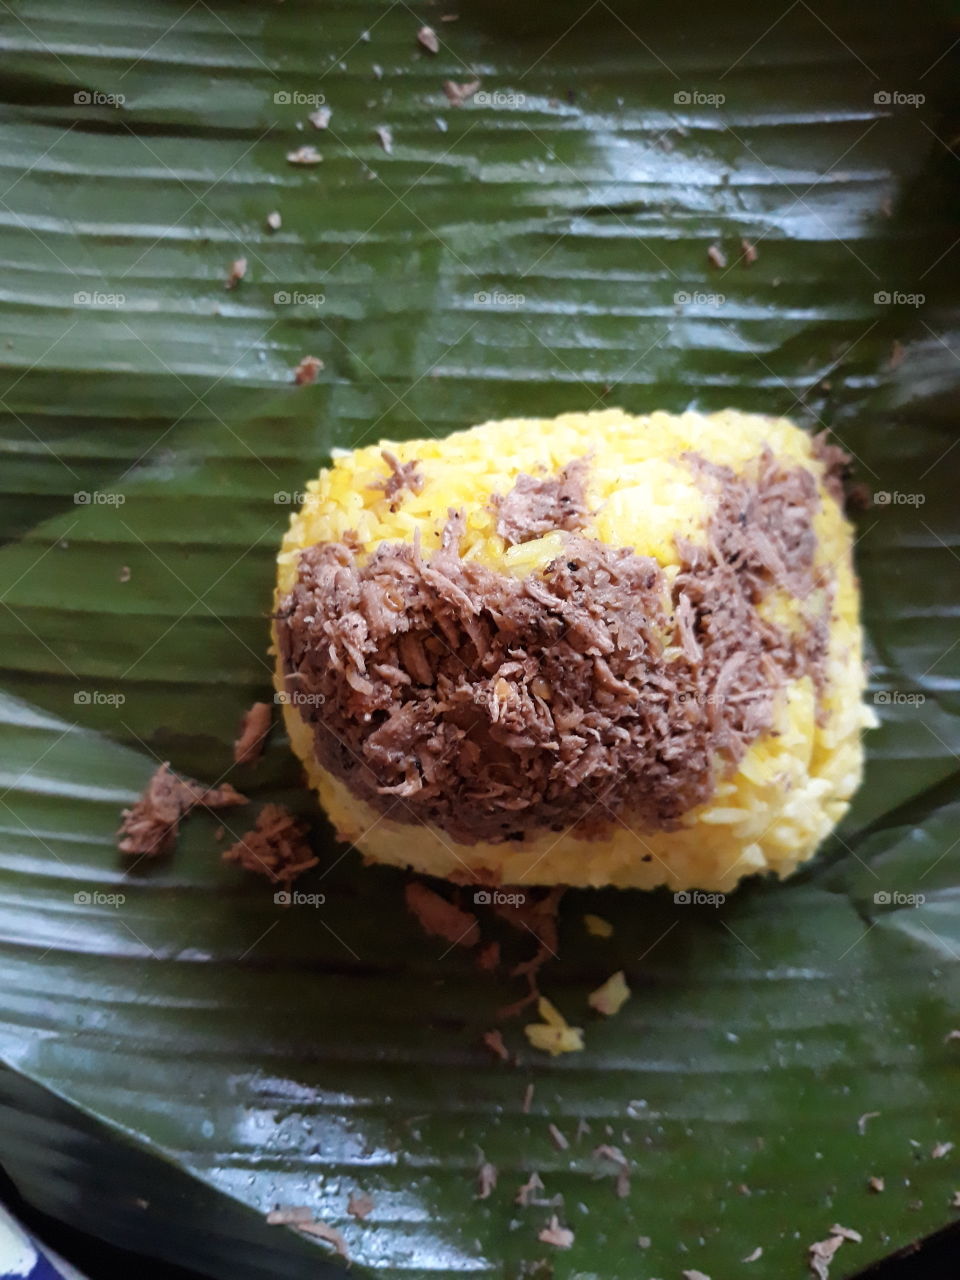 Hot and spicy version of Chicken Pastil or Chicken Pater, rice delicacy from the Maranao tribe in the Philippines, topped with grilled chicken breast and browned coconut milk and wrapped in banana leaves.